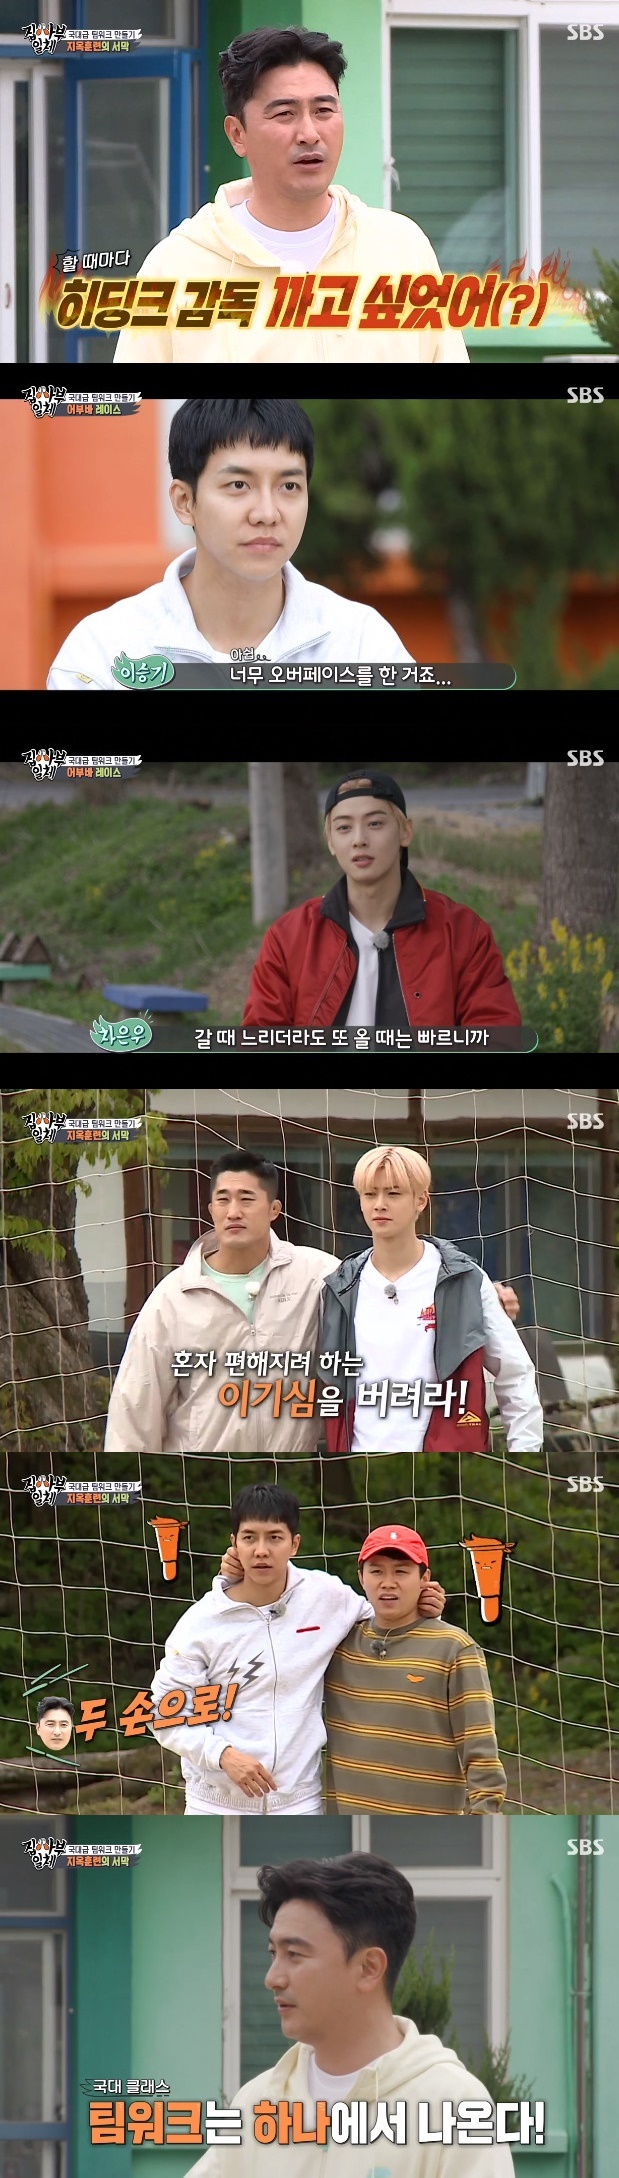 Seoul = = Ahn Jung-hwan handed over the teamwork training he learned under Hiddink to the All The Butlers team.On SBS All The Butlers broadcasted on the 9th, teamwork training master Ahn Jung-hwan appeared as master and sent Haru with the members.On this day, Ahn Jung-hwan played a role in strengthening the teamwork of All The Butlers members.Before the first teamwork training, Ahn Jung-hwan sighed when asked, What kind of player was you?I was individualistic and selfish, he said, laughing, saying, I honestly knew only myself. He added, This kind of teamwork training changes.The members of All The Butlers were embarrassed not knowing what training was. Lee Seung-gi said, What would you do at night in Gangwon-do closing school?Something bad Feelings is coming, he suspected.In the first exercise, the members arrived at the lab, where they decided to enter through the Scissors, Rocks, and Paper, and Jung Eun-woo was the first to open.When Jung Eun-woo opened the door and the other members closed the door and the teamwork broke down from the beginning. Ahn Jung-hwan said, No matter how much Scissors, Rocks, Paper, it is a little bit to set up the youngest.The members were panicking in the pitch-black darkness, unable to believe each other; after all the tests, Ahn Jung-hwan appeared as master.I thought All The Butlers teamwork was good, but its not at all, it was an experiment I wanted to see when I was in a corner and I was with my colleagues and helping out, he explained.I will have a really tough teamwork training tomorrow, said Ahn Jung-hwan, and if you do not have yourself, go home now.The next day, Ahn Jung-hwan paired Lee Seung-gi Yang Se-hyeong, Kim Dong-Hyun Cha Jung Eun-woo.Haru had to be all together all day long in group, explained Ahn Jung-hwan, who deliberately made up a combination that would not fit well.Each group washed each others faces first, awkward in their first attempt.Yang Se-hyeong washed Lee Seung-gis face and laughed, saying, Its Feelings that you two accidentally kissed in a drink.Then, he started physical training with a pair of two. Hearing and dribbling. Lee Seung-gi and Yang Se-hyeong teached from the start.Ahn Jung-hwan told players to close their eyes and open their eyes if they wanted to change their team members.Lee Seung-gi and Yang Se-hyeong both met with eyes and laughed.I carried on my running training, Ahn Jung-hwan said, I had a hard time doing this when I was a player, I wanted to die after 10 times.Every time I did this, I wanted to play Hiddink, he said.  (Hiddink) deliberately created a team between the same position competitors.I made my colleagues care for each other while filling in what they lacked. I originally hated Kim Tae-young, but he was a defender and I was a striker and I did not like it because I walked a lot of tackles, he added. The national team joined and got closer through teamwork training.I felt it was important - I knew if I was hard, my colleagues were hard, Lee Seung-gi said.Yang Se-hyeong also said, I also want to be so hard for my colleagues because I am hard.Kim Dong-Hyun ran with Jung Eun-woo in Urbuba Race.When I ran, the last runner was the Feelings, who reversed, and Donghyun Lee was so trustworthy and red-toned, said Jung Eun-woo.I can never win alone, I have to cooperate, said Ahn Jung-hwan, who looked satisfied.In the following trailer, Ahn Jung-hwan surprised the members by saying, I originally tried to broadcast and stop until next year.Interest in his Confessions, which has successfully drawn his second life as a broadcaster, is gathering attention.